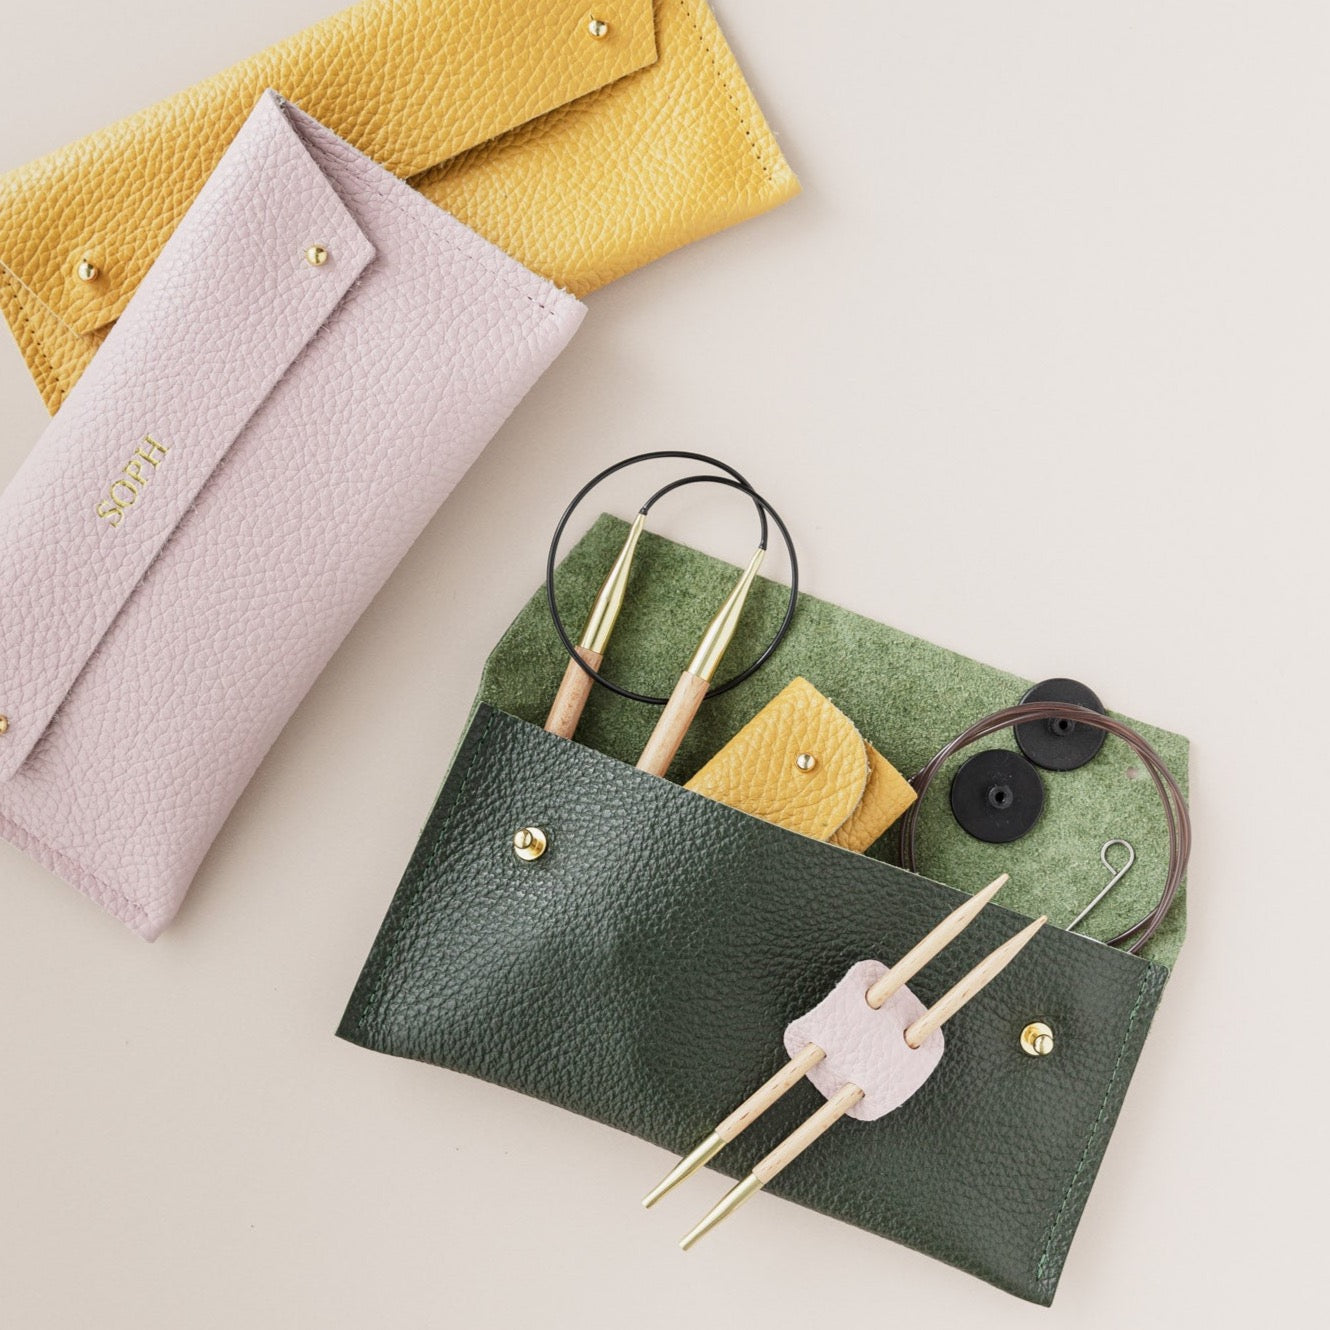 Yellow, pink and green sewing cases sit on a cream background. The green pouch shows circular knitting needles and notions inside it.